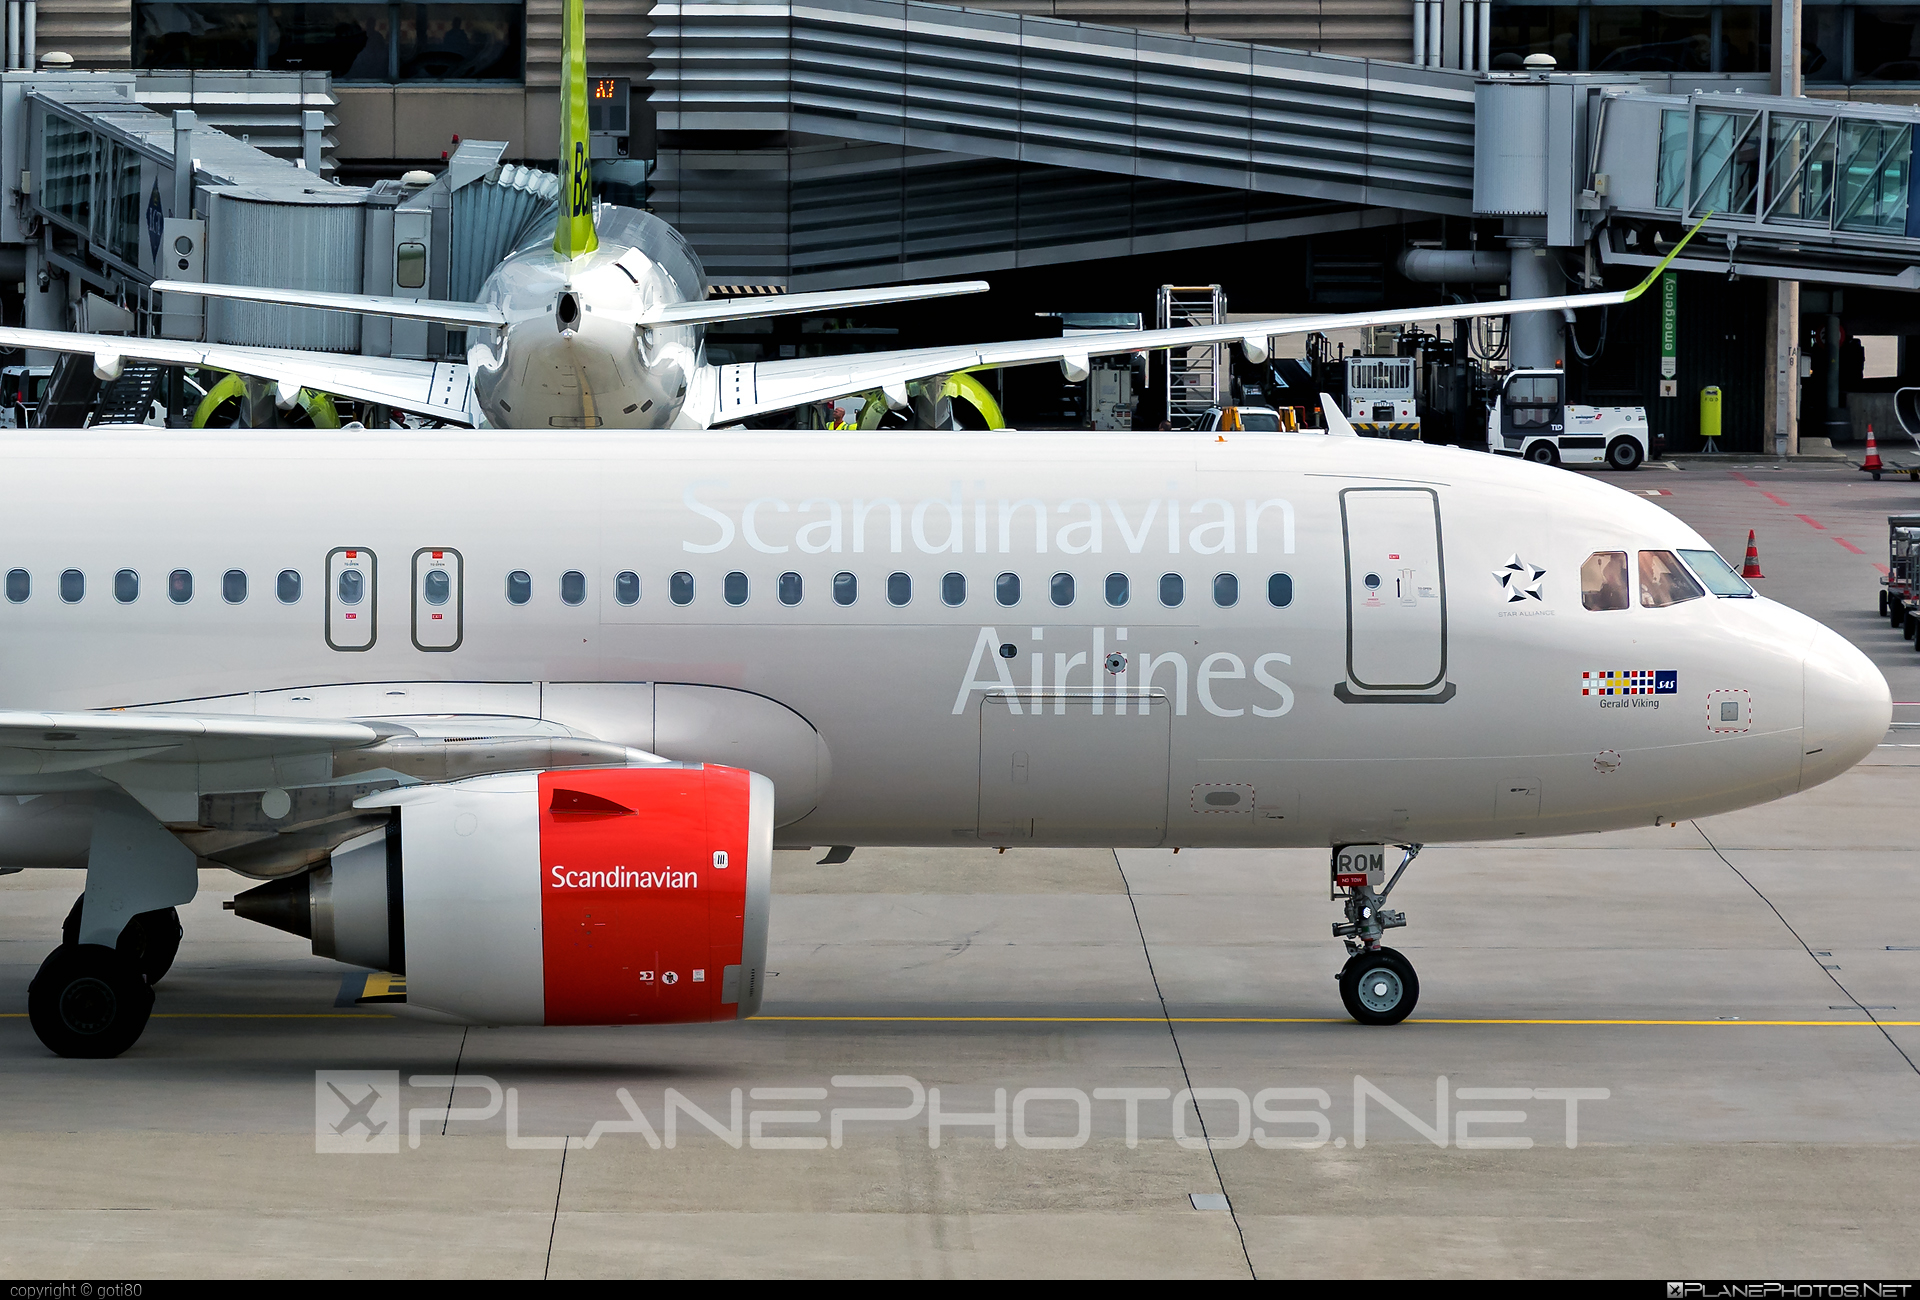 Airbus A320-251N - SE-ROM operated by Scandinavian Airlines (SAS) #a320 #a320family #a320neo #airbus #airbus320 #sas #sasairlines #scandinavianairlines